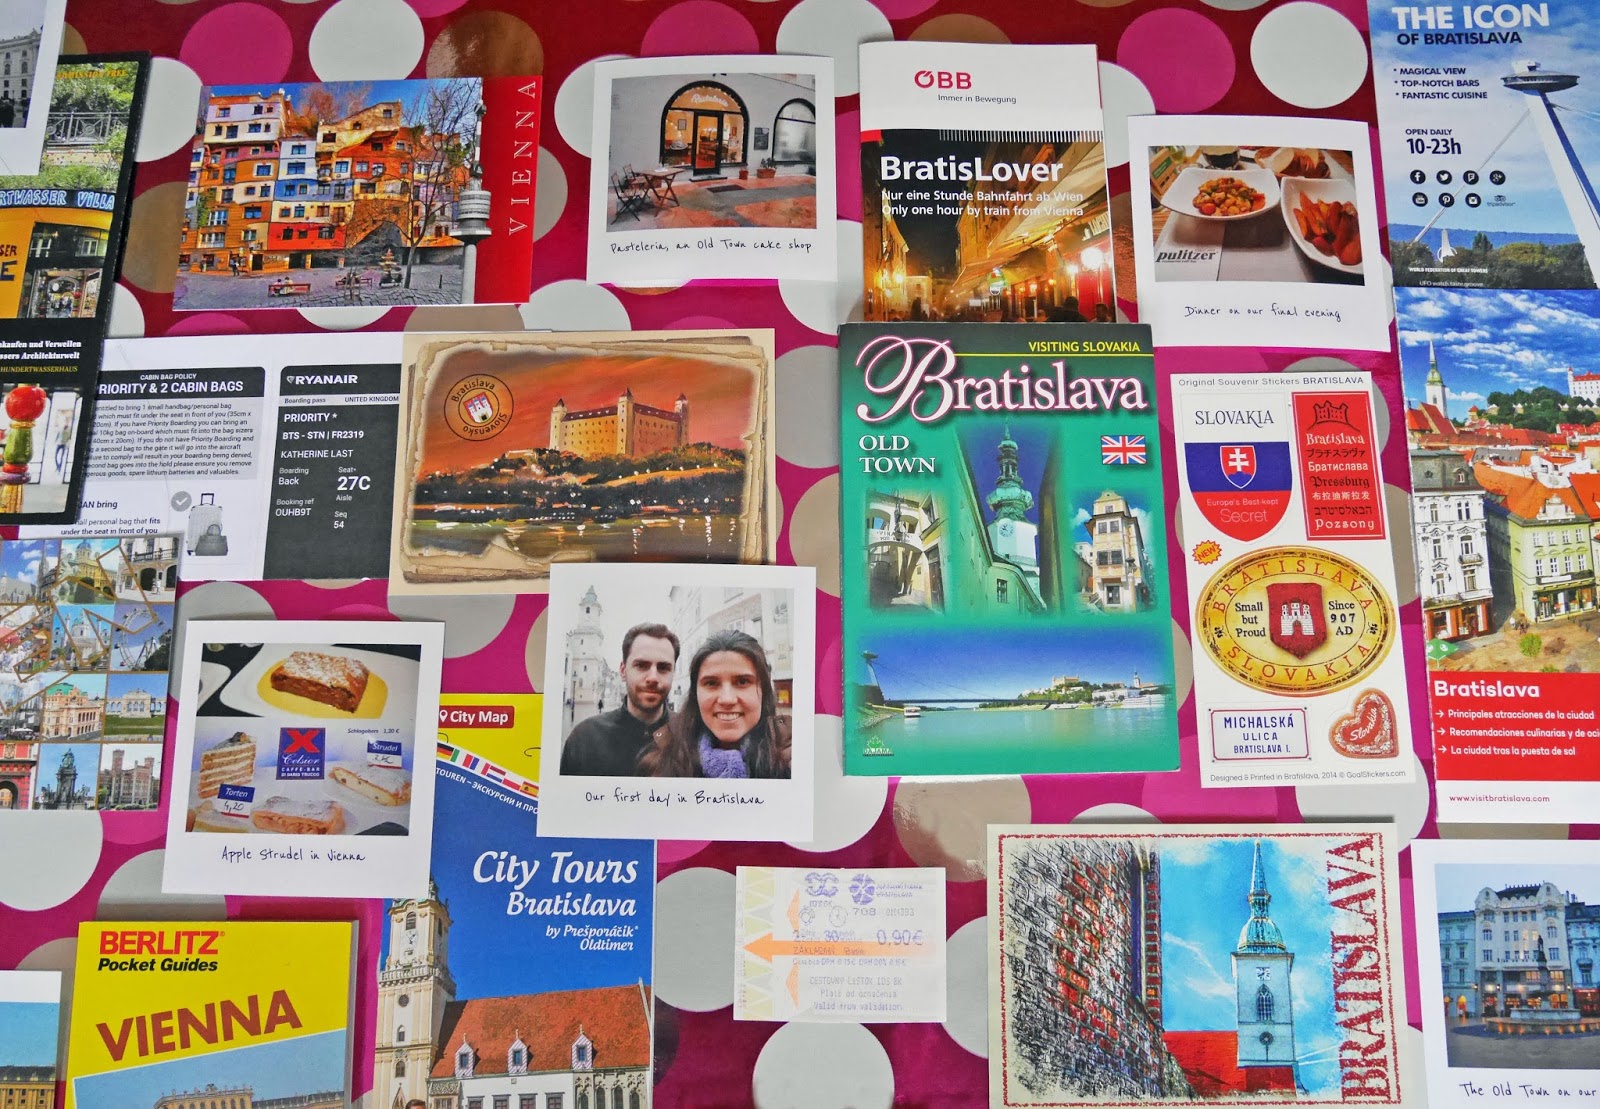 Photos, postcards, leaflets and stickers from Bratislava, Slovakia